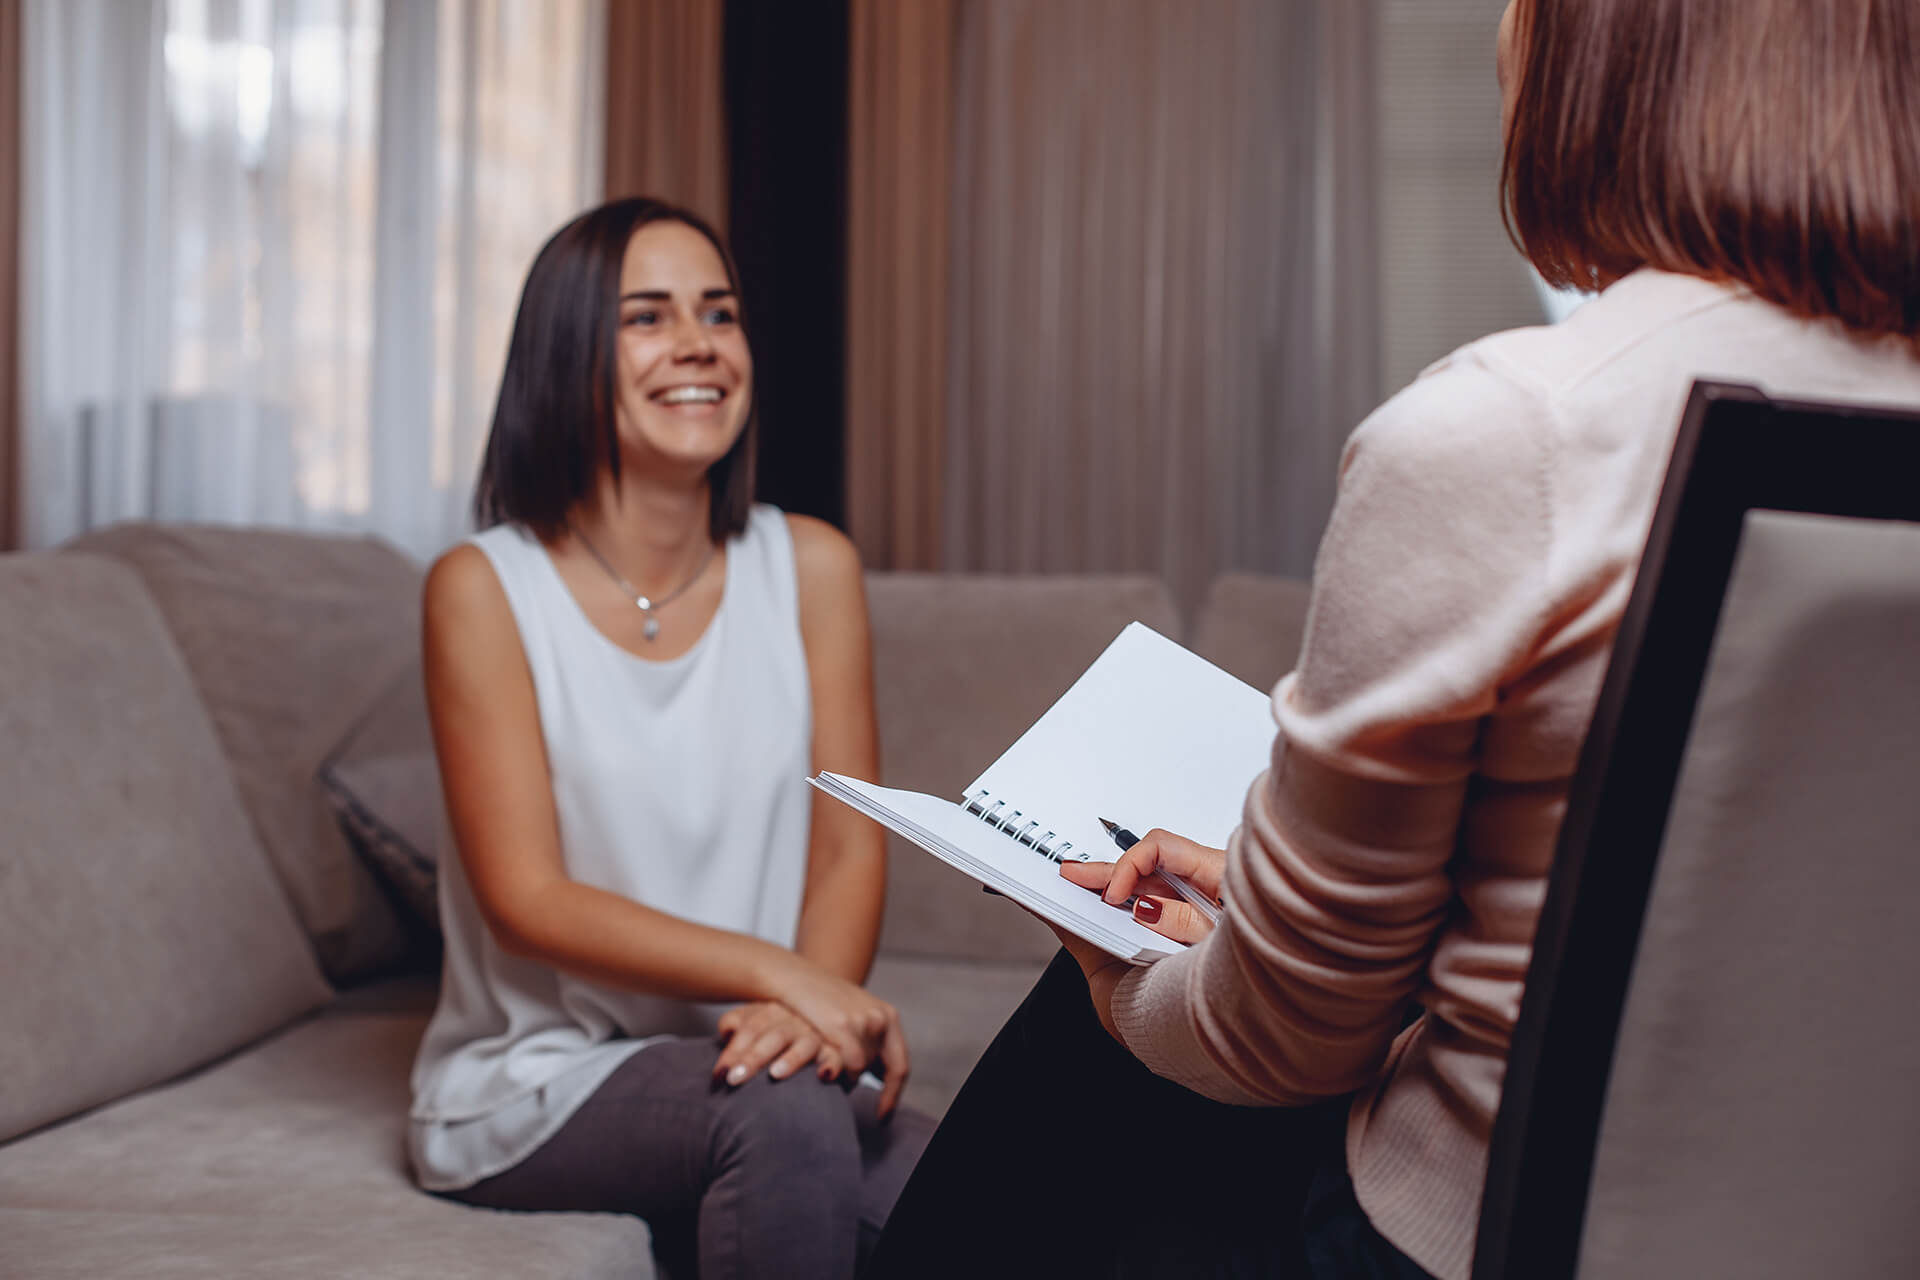 Therapist and client share a smile during an online Cognitive Behavioral Therapy (CBT) session for eating disorders like anorexia, bulimia, and binge eating disorder